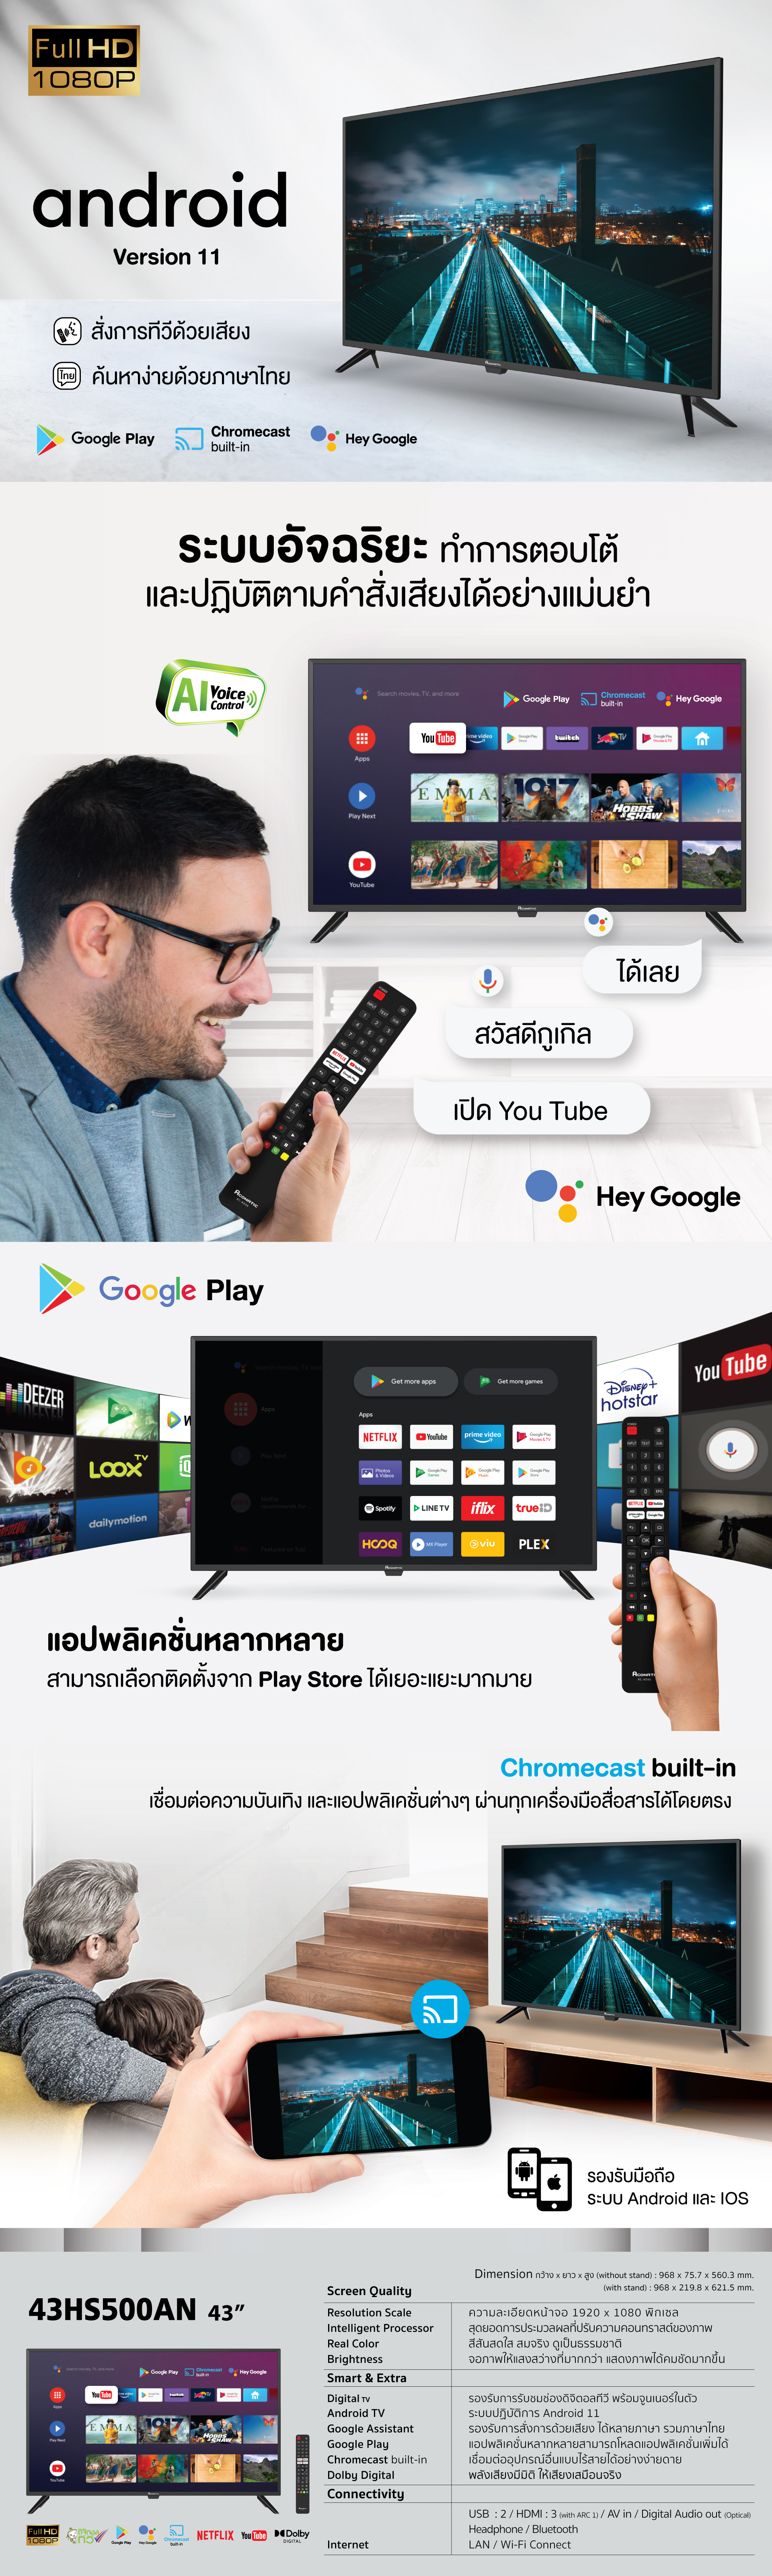 Android TV 43" model 43HS500AN